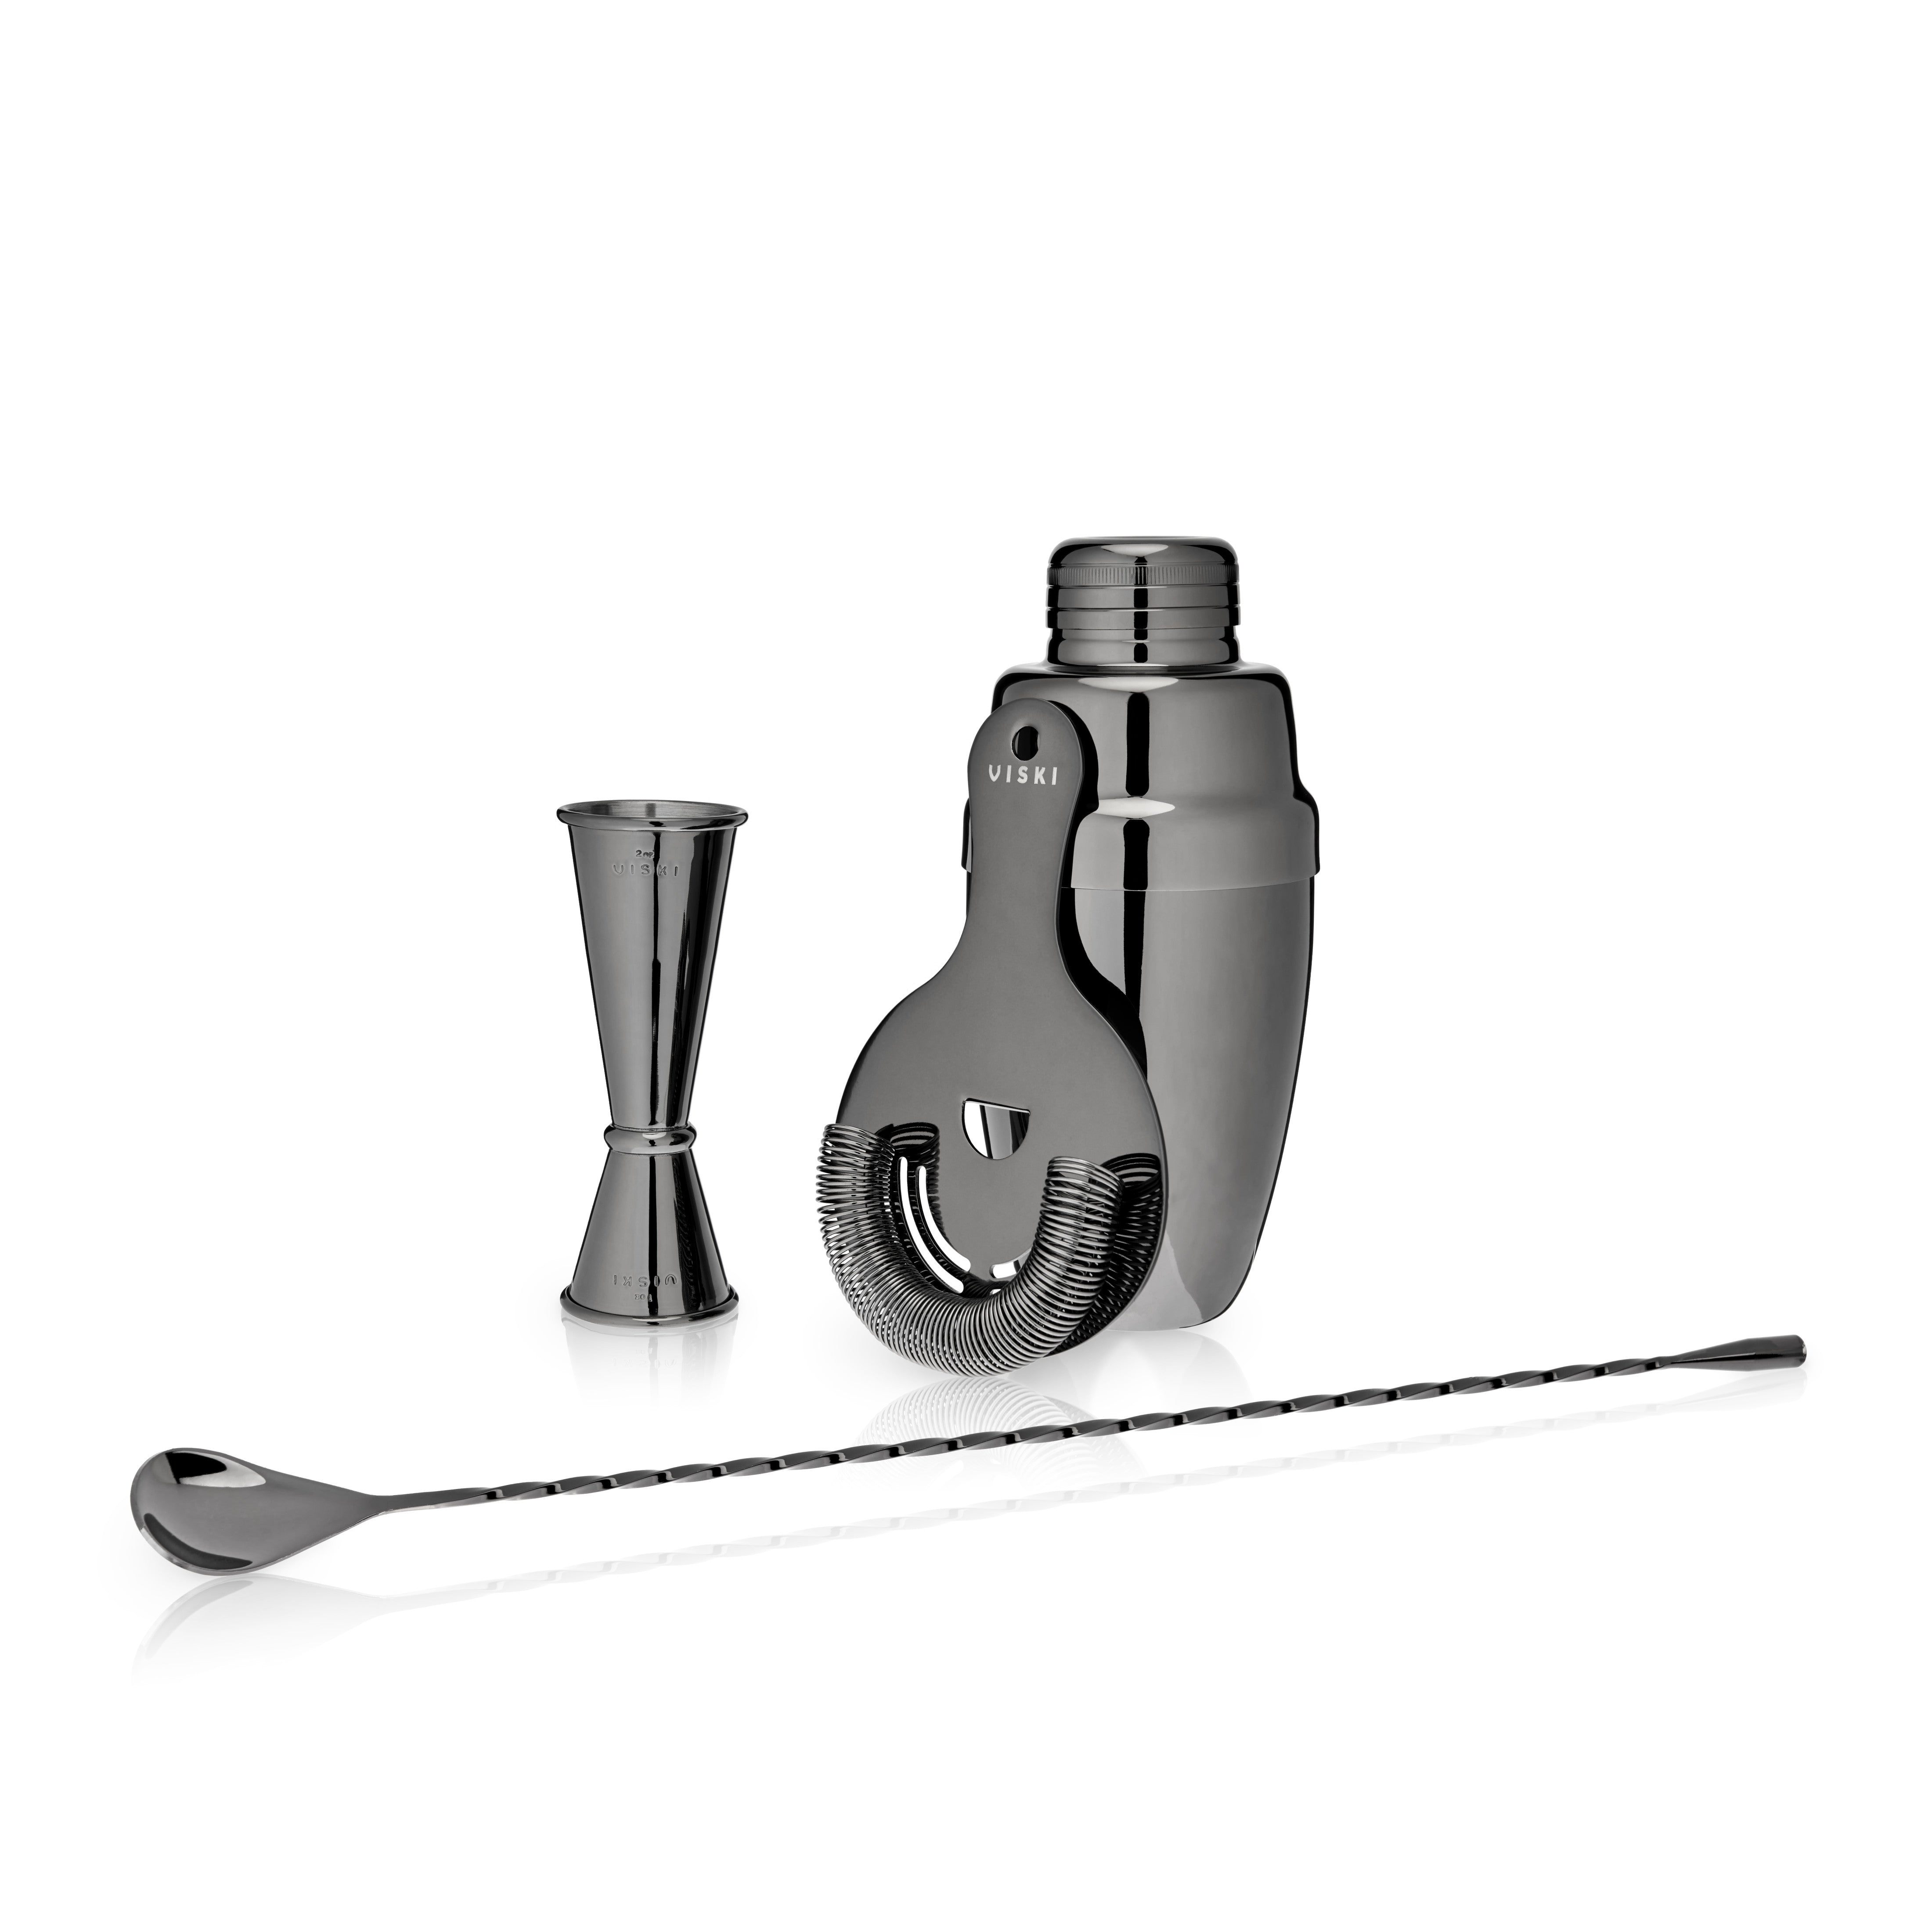 Viski Gunmetal Bartender Kit, Drink Mixers for Cocktails Gift Essentials:  Weighted Cobbler Shaker, Hawthorne Strainer, Weighted Barspoon, and  Japanese-Style Double Jigger, 4pc Set, Black